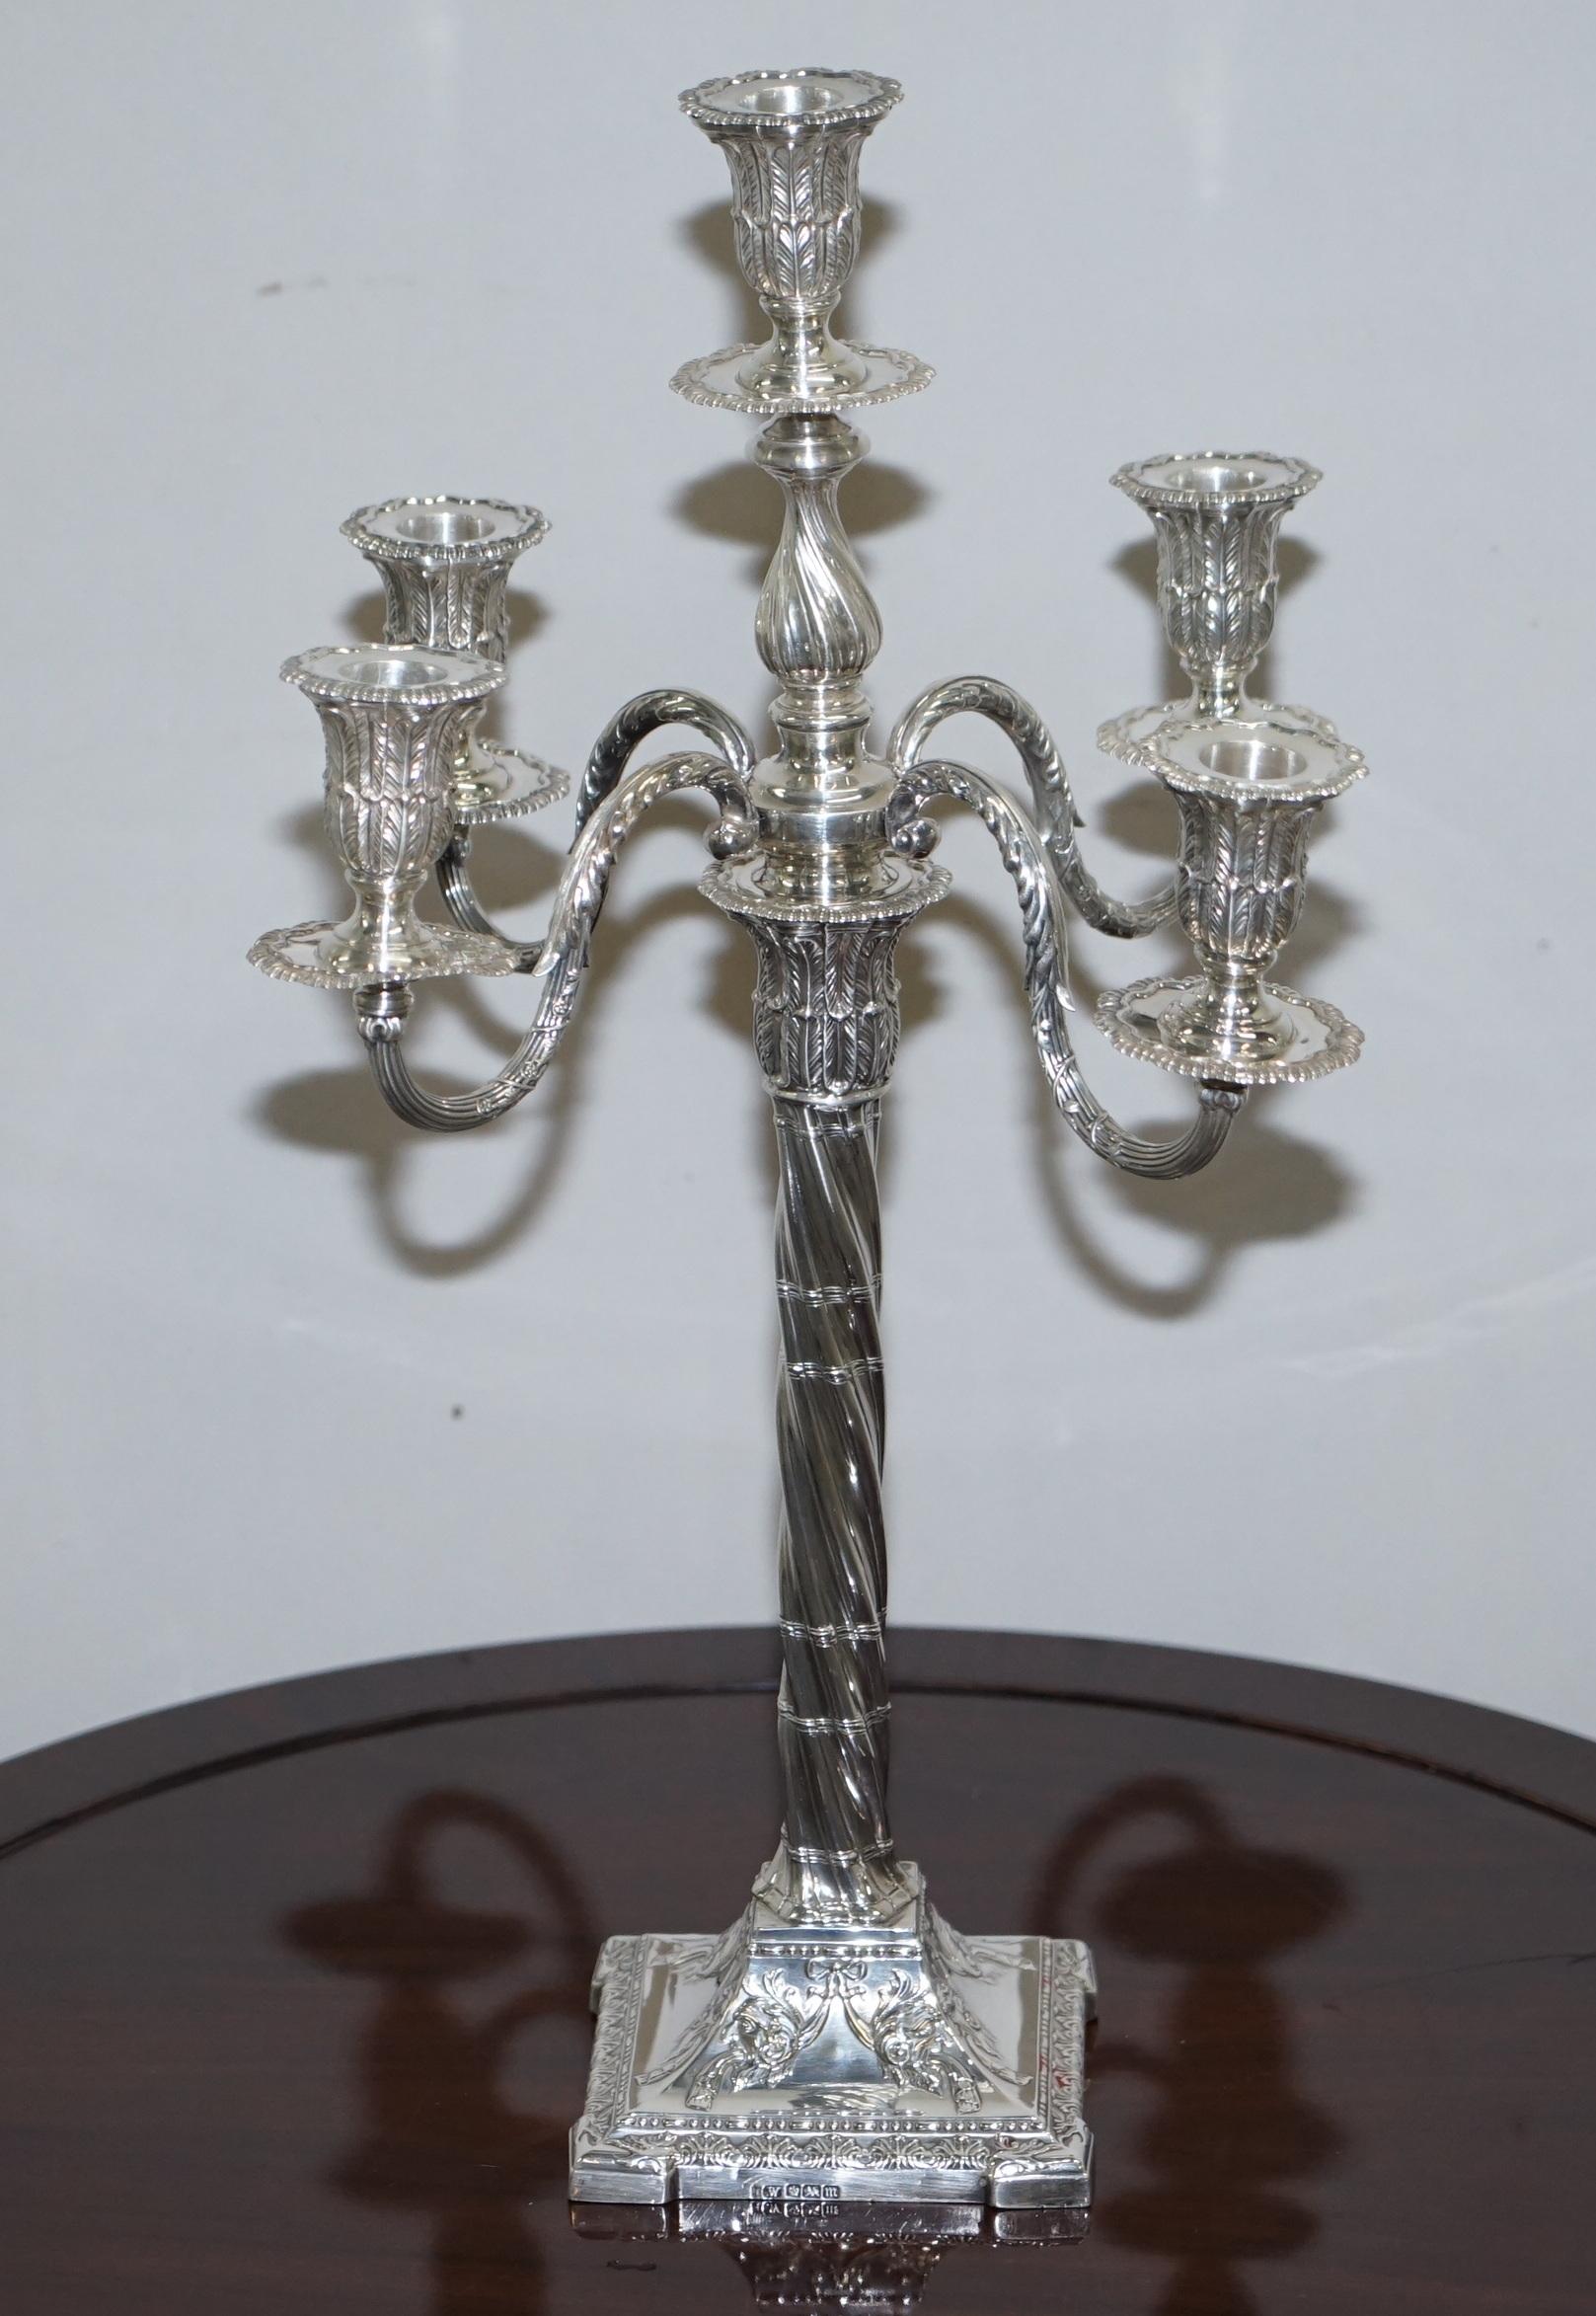 English Pair of 1904 Antique Solid Sterling Silver Henry Wigfull Candelabra Candlesticks